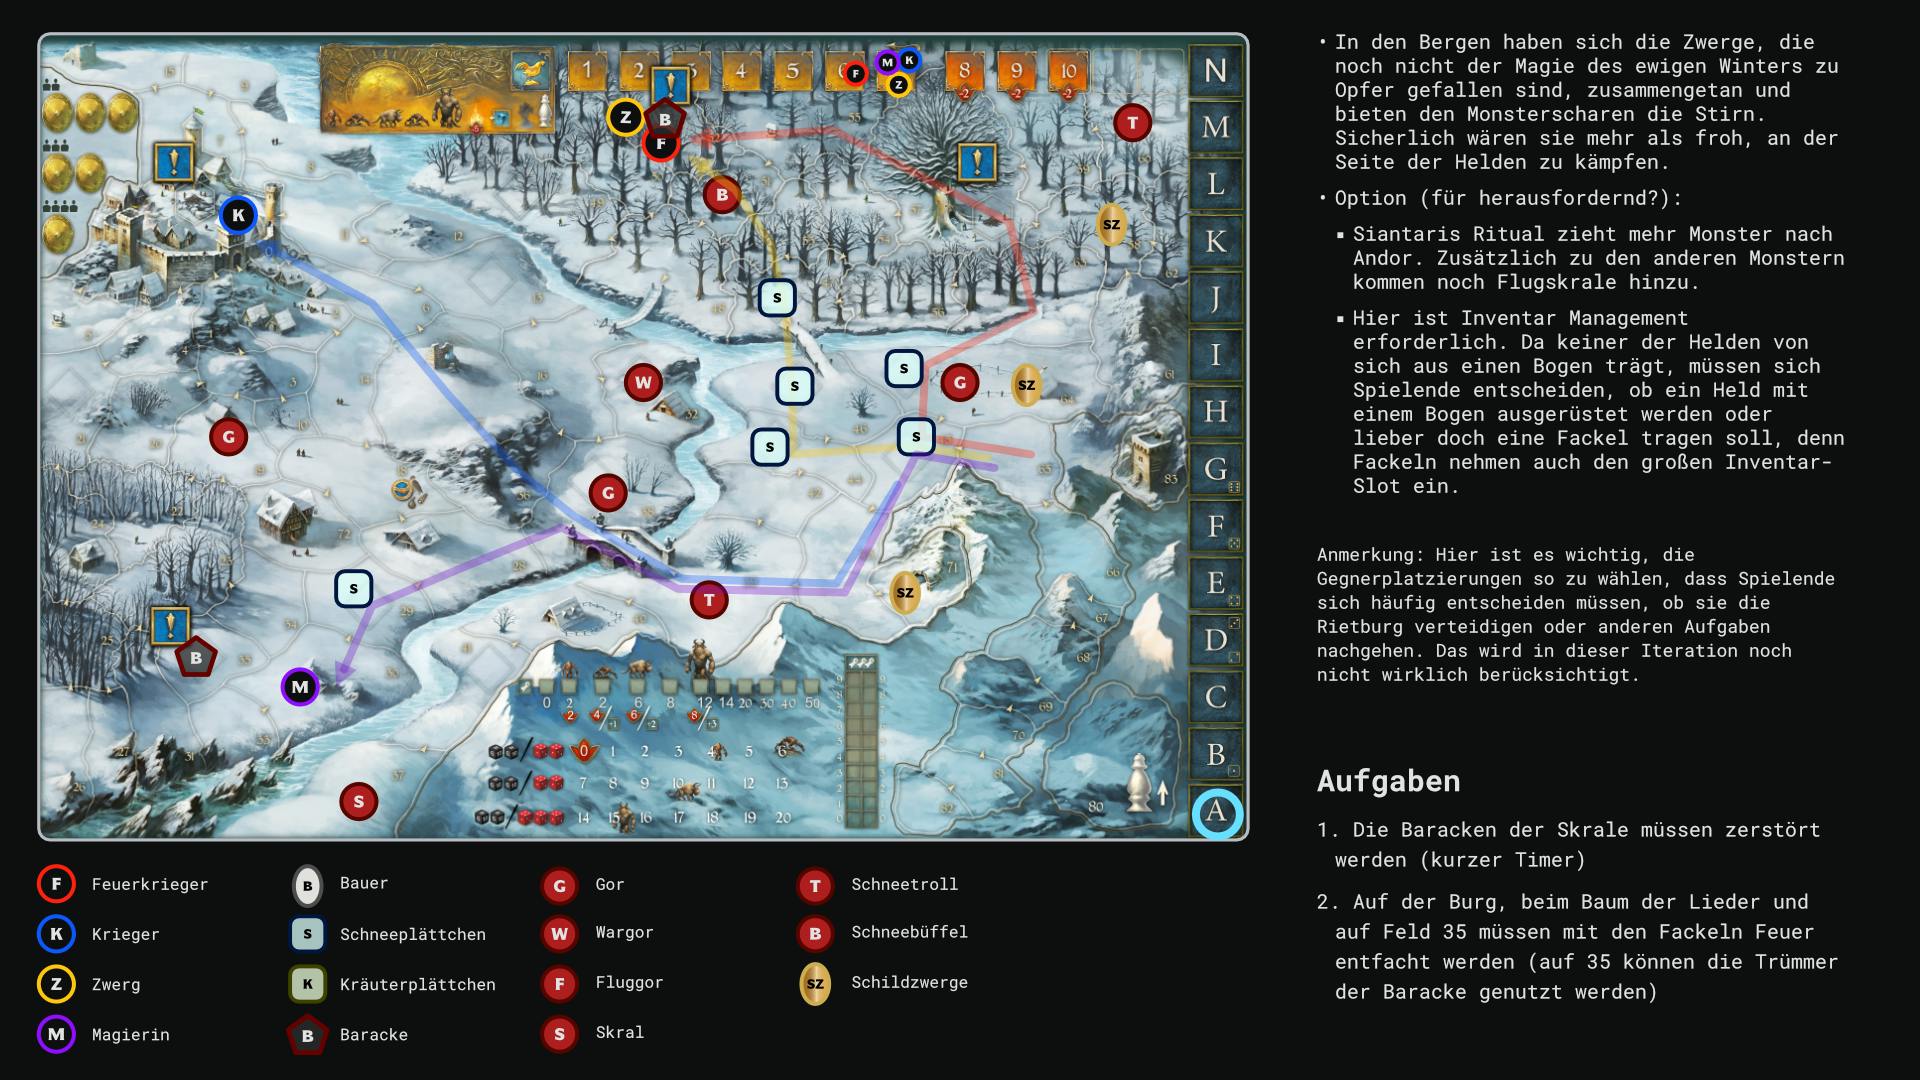 A slide showing part of a mission and possible movement actions in the board game Legends of Andor